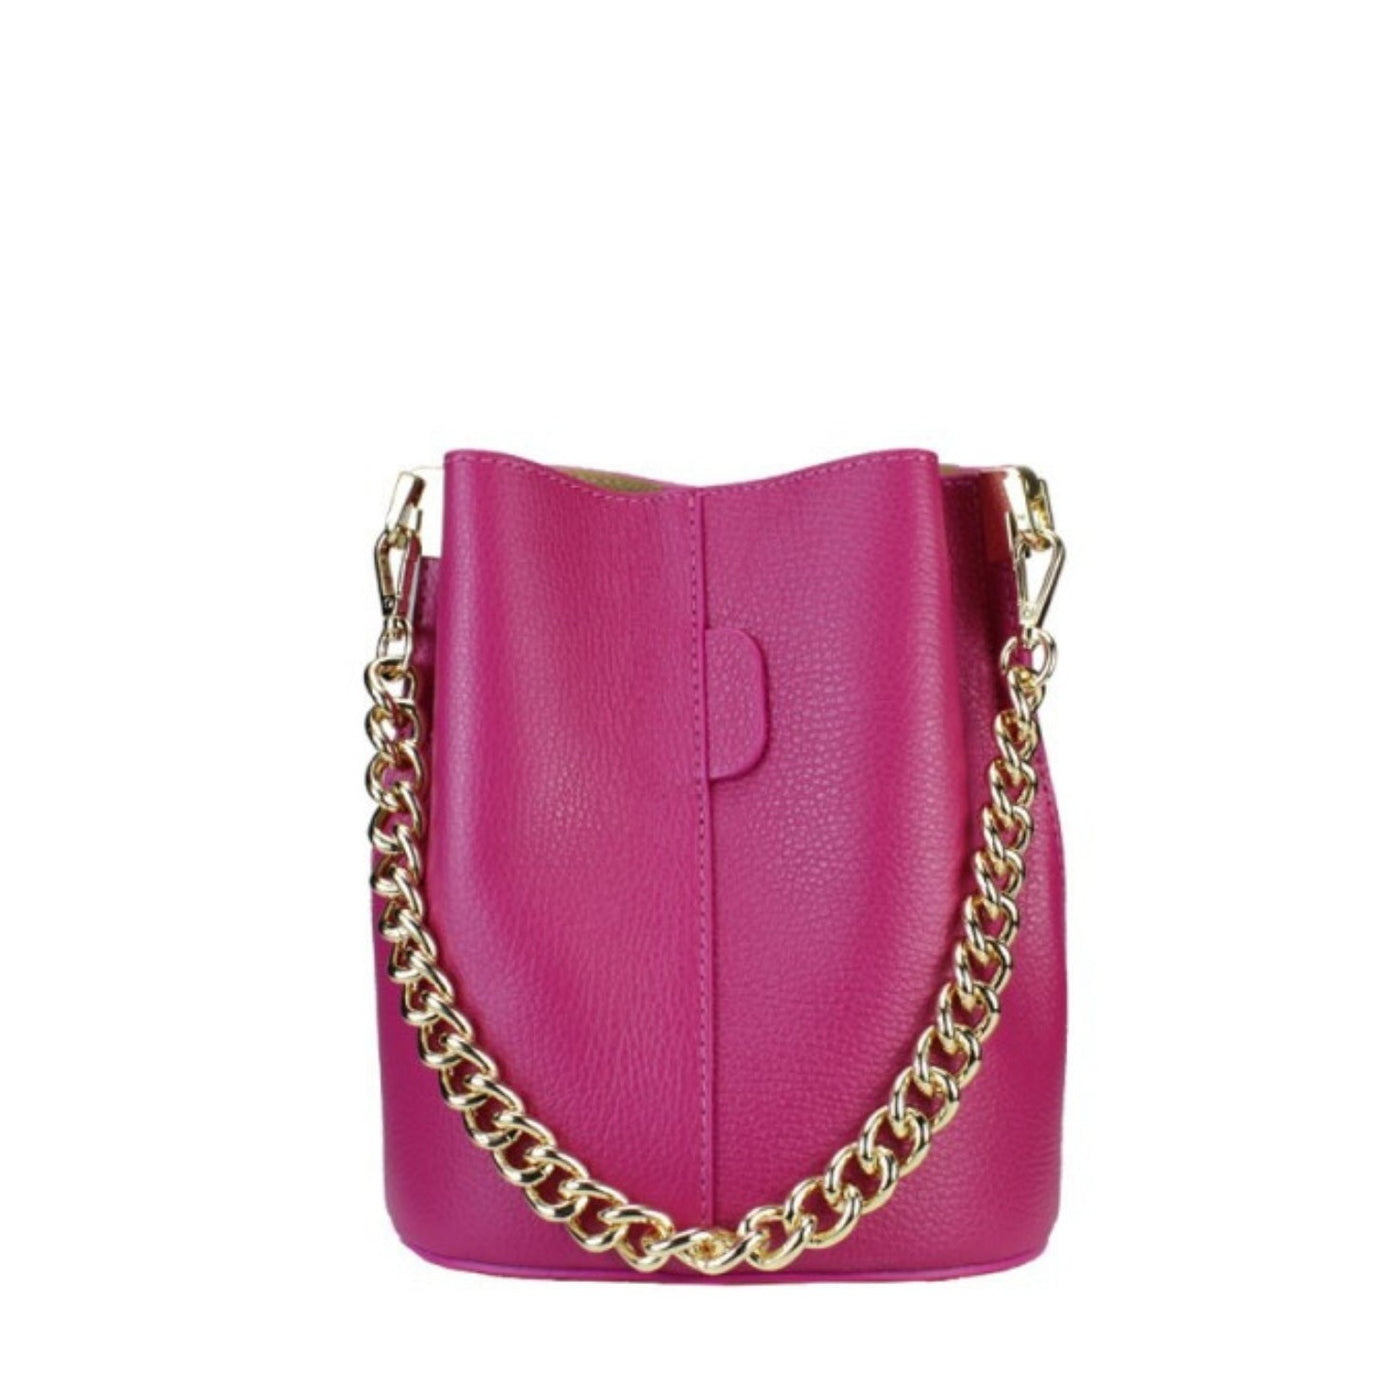 Leather bag "Ravenna midi" with leather chain, Pink